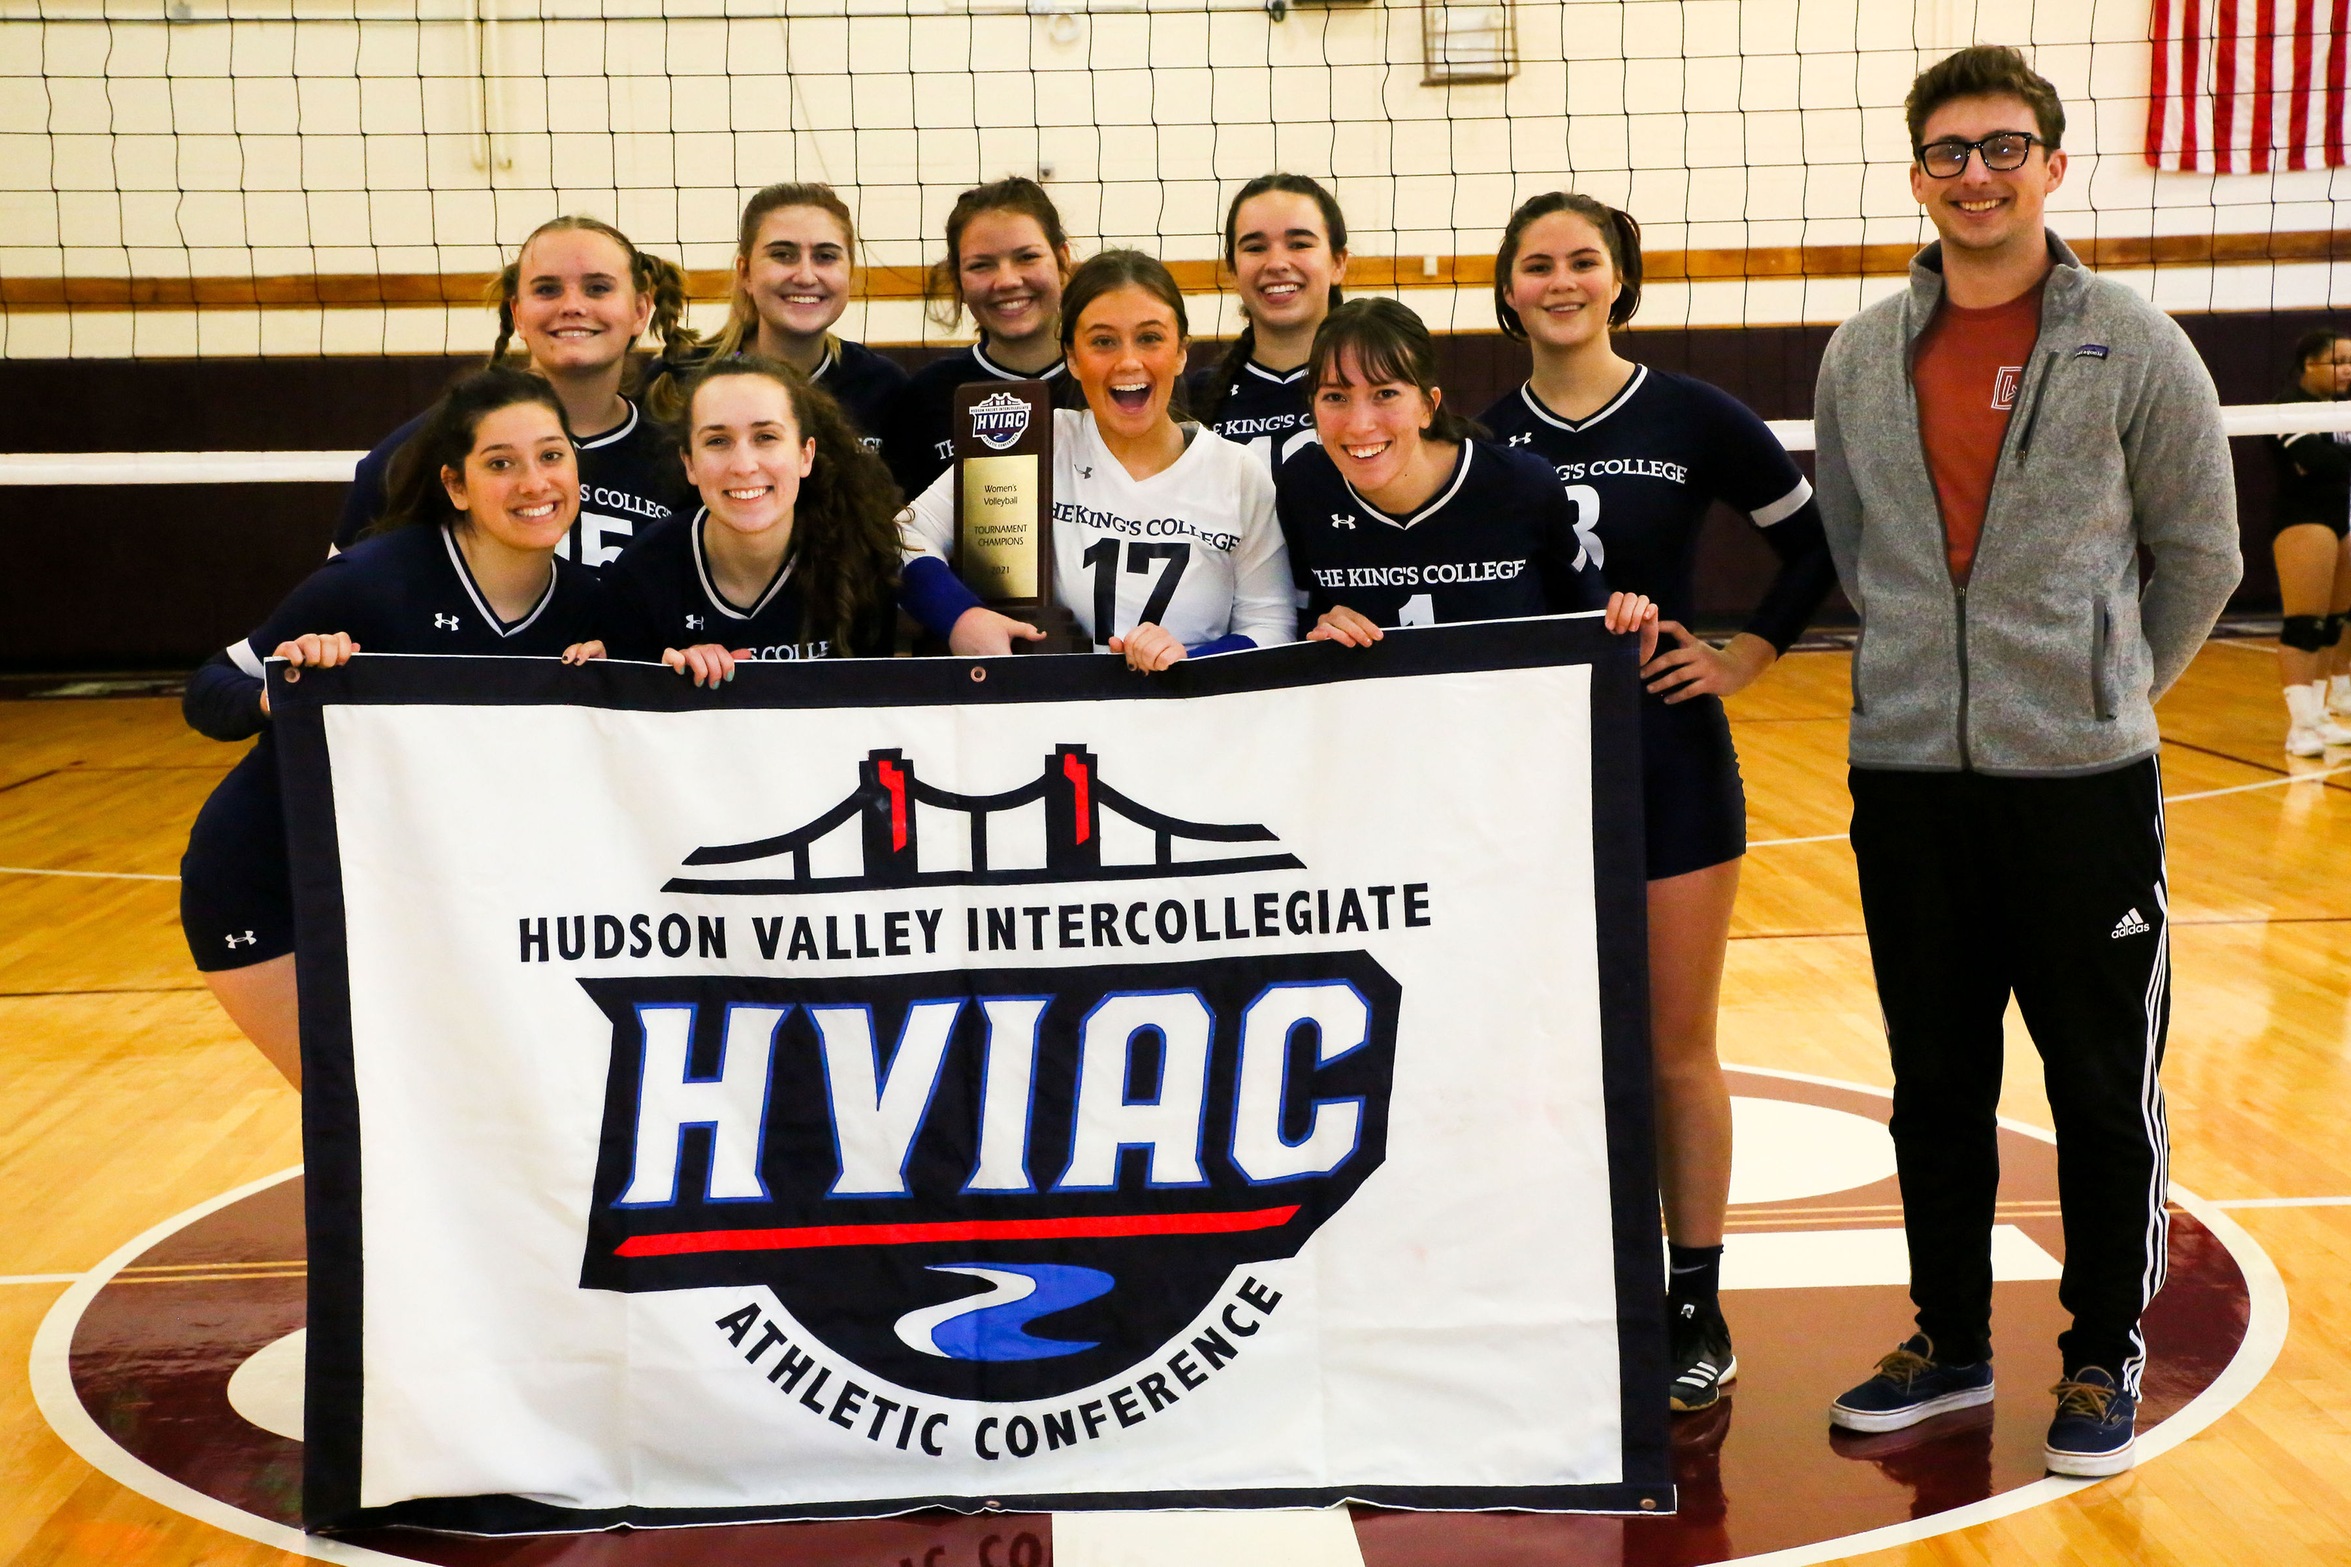 Lady Lions Roar to a Repeat as HVIAC Champions